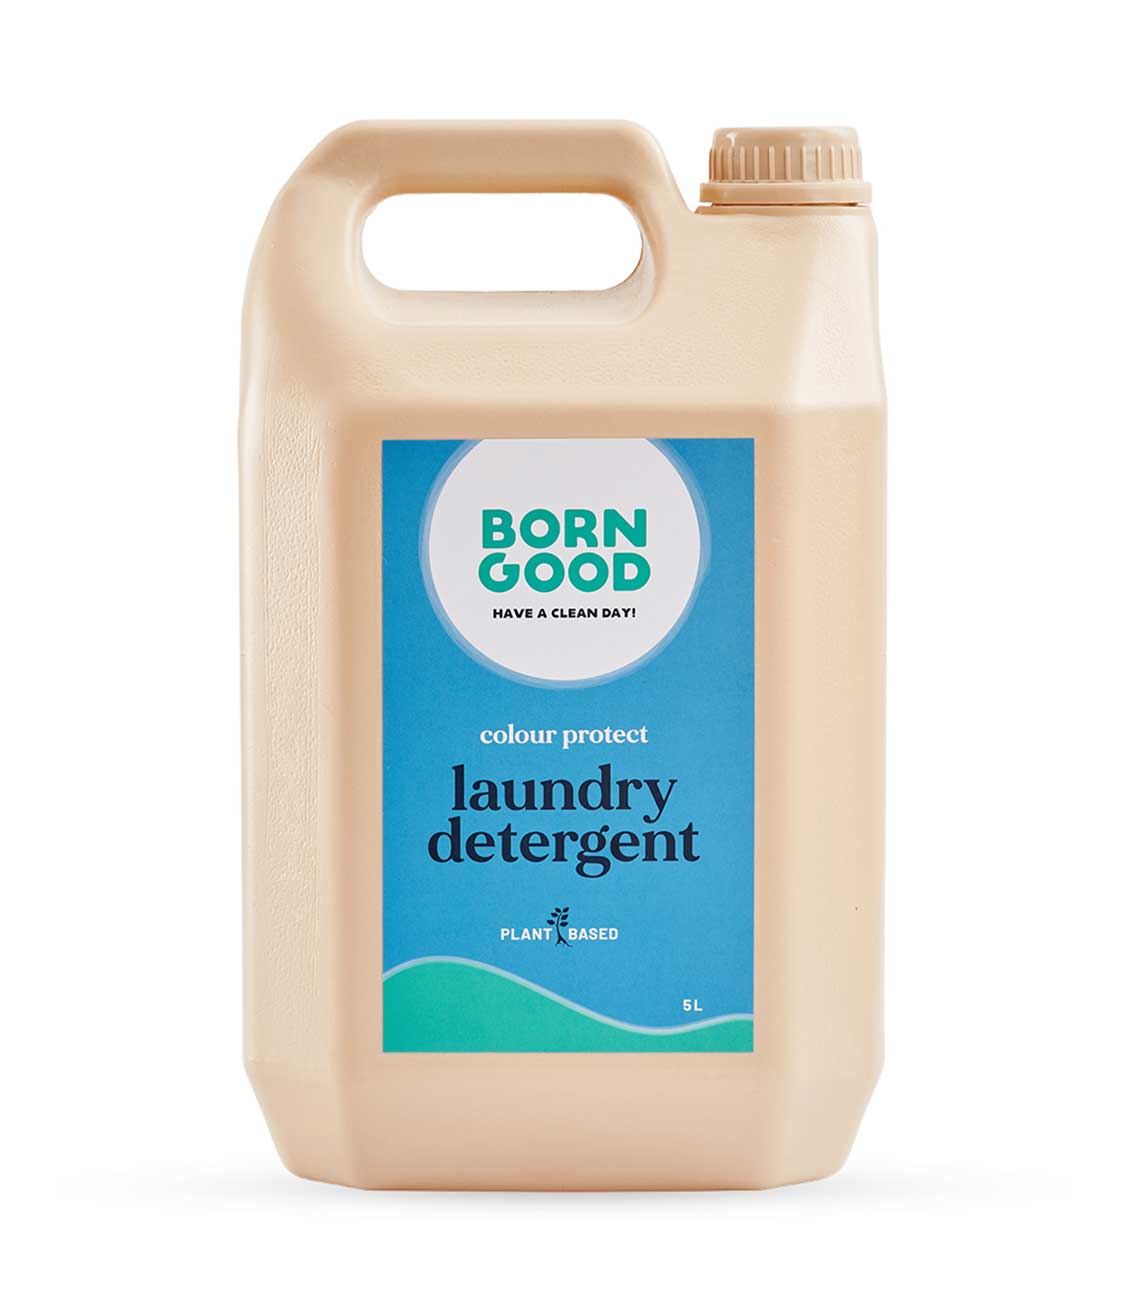 Born Good Plant-based Colour Protect Laundry Detergent - 5 L Can